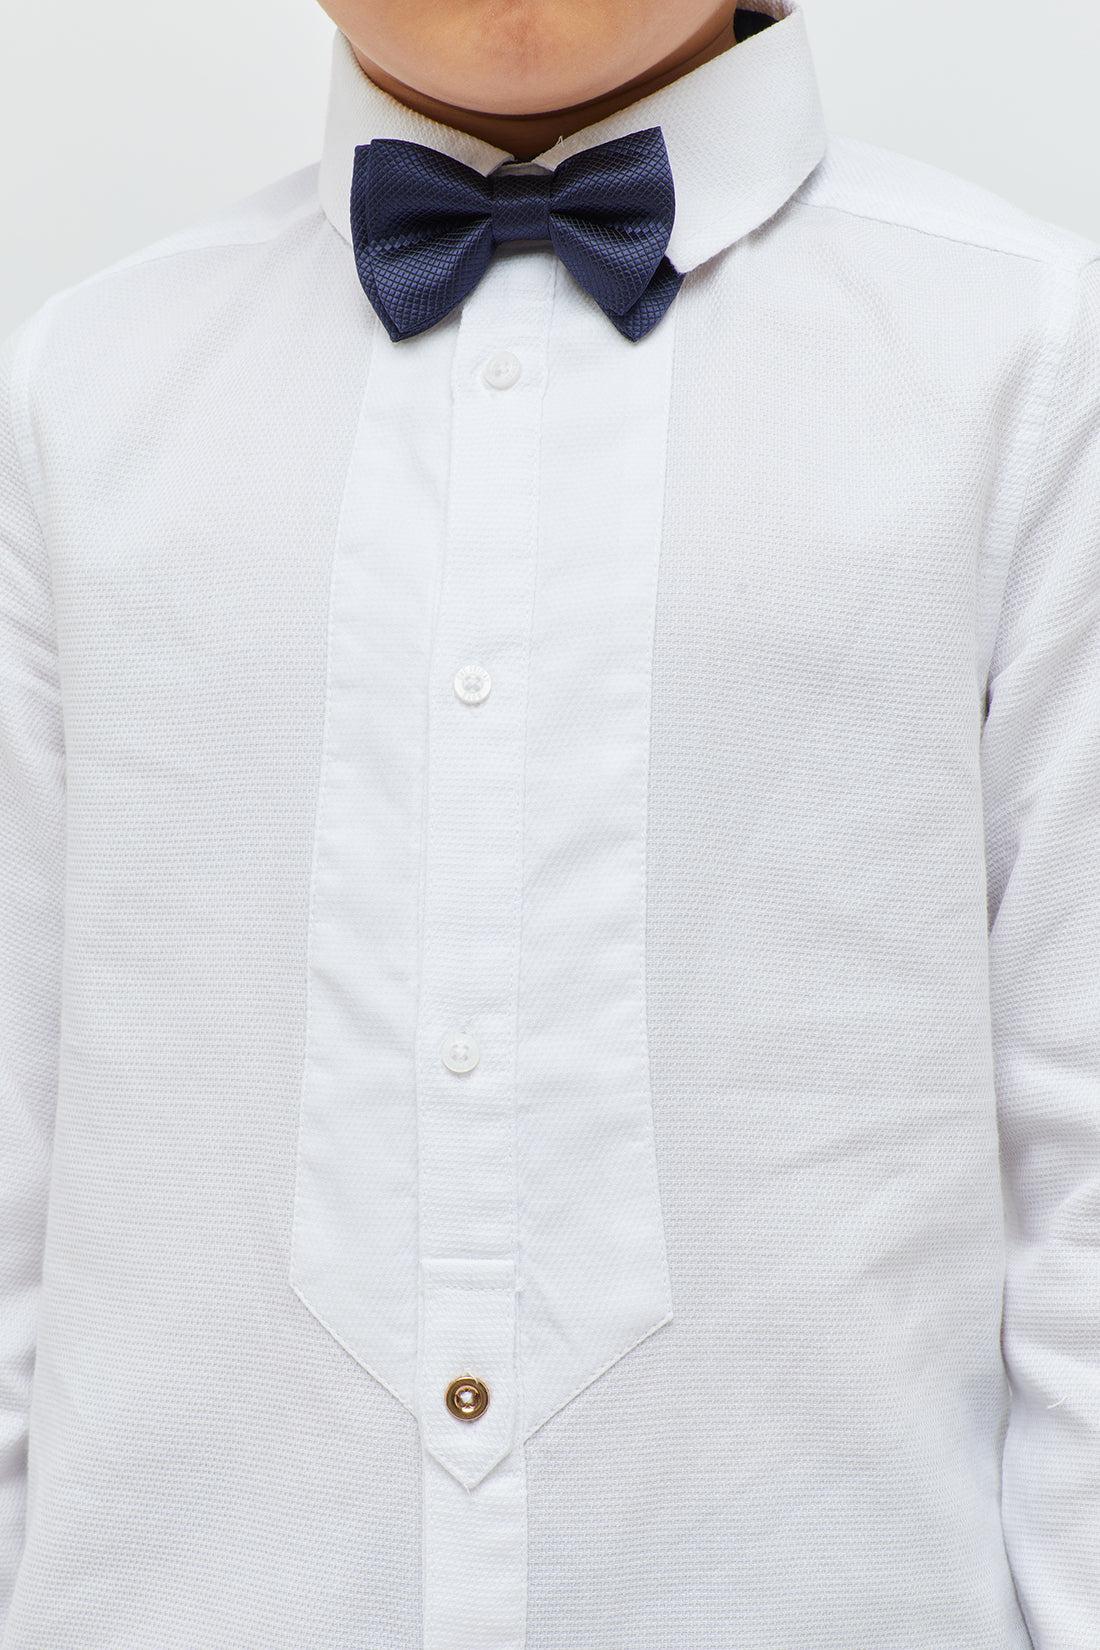 One Friday Classic Off White Formal Shirt